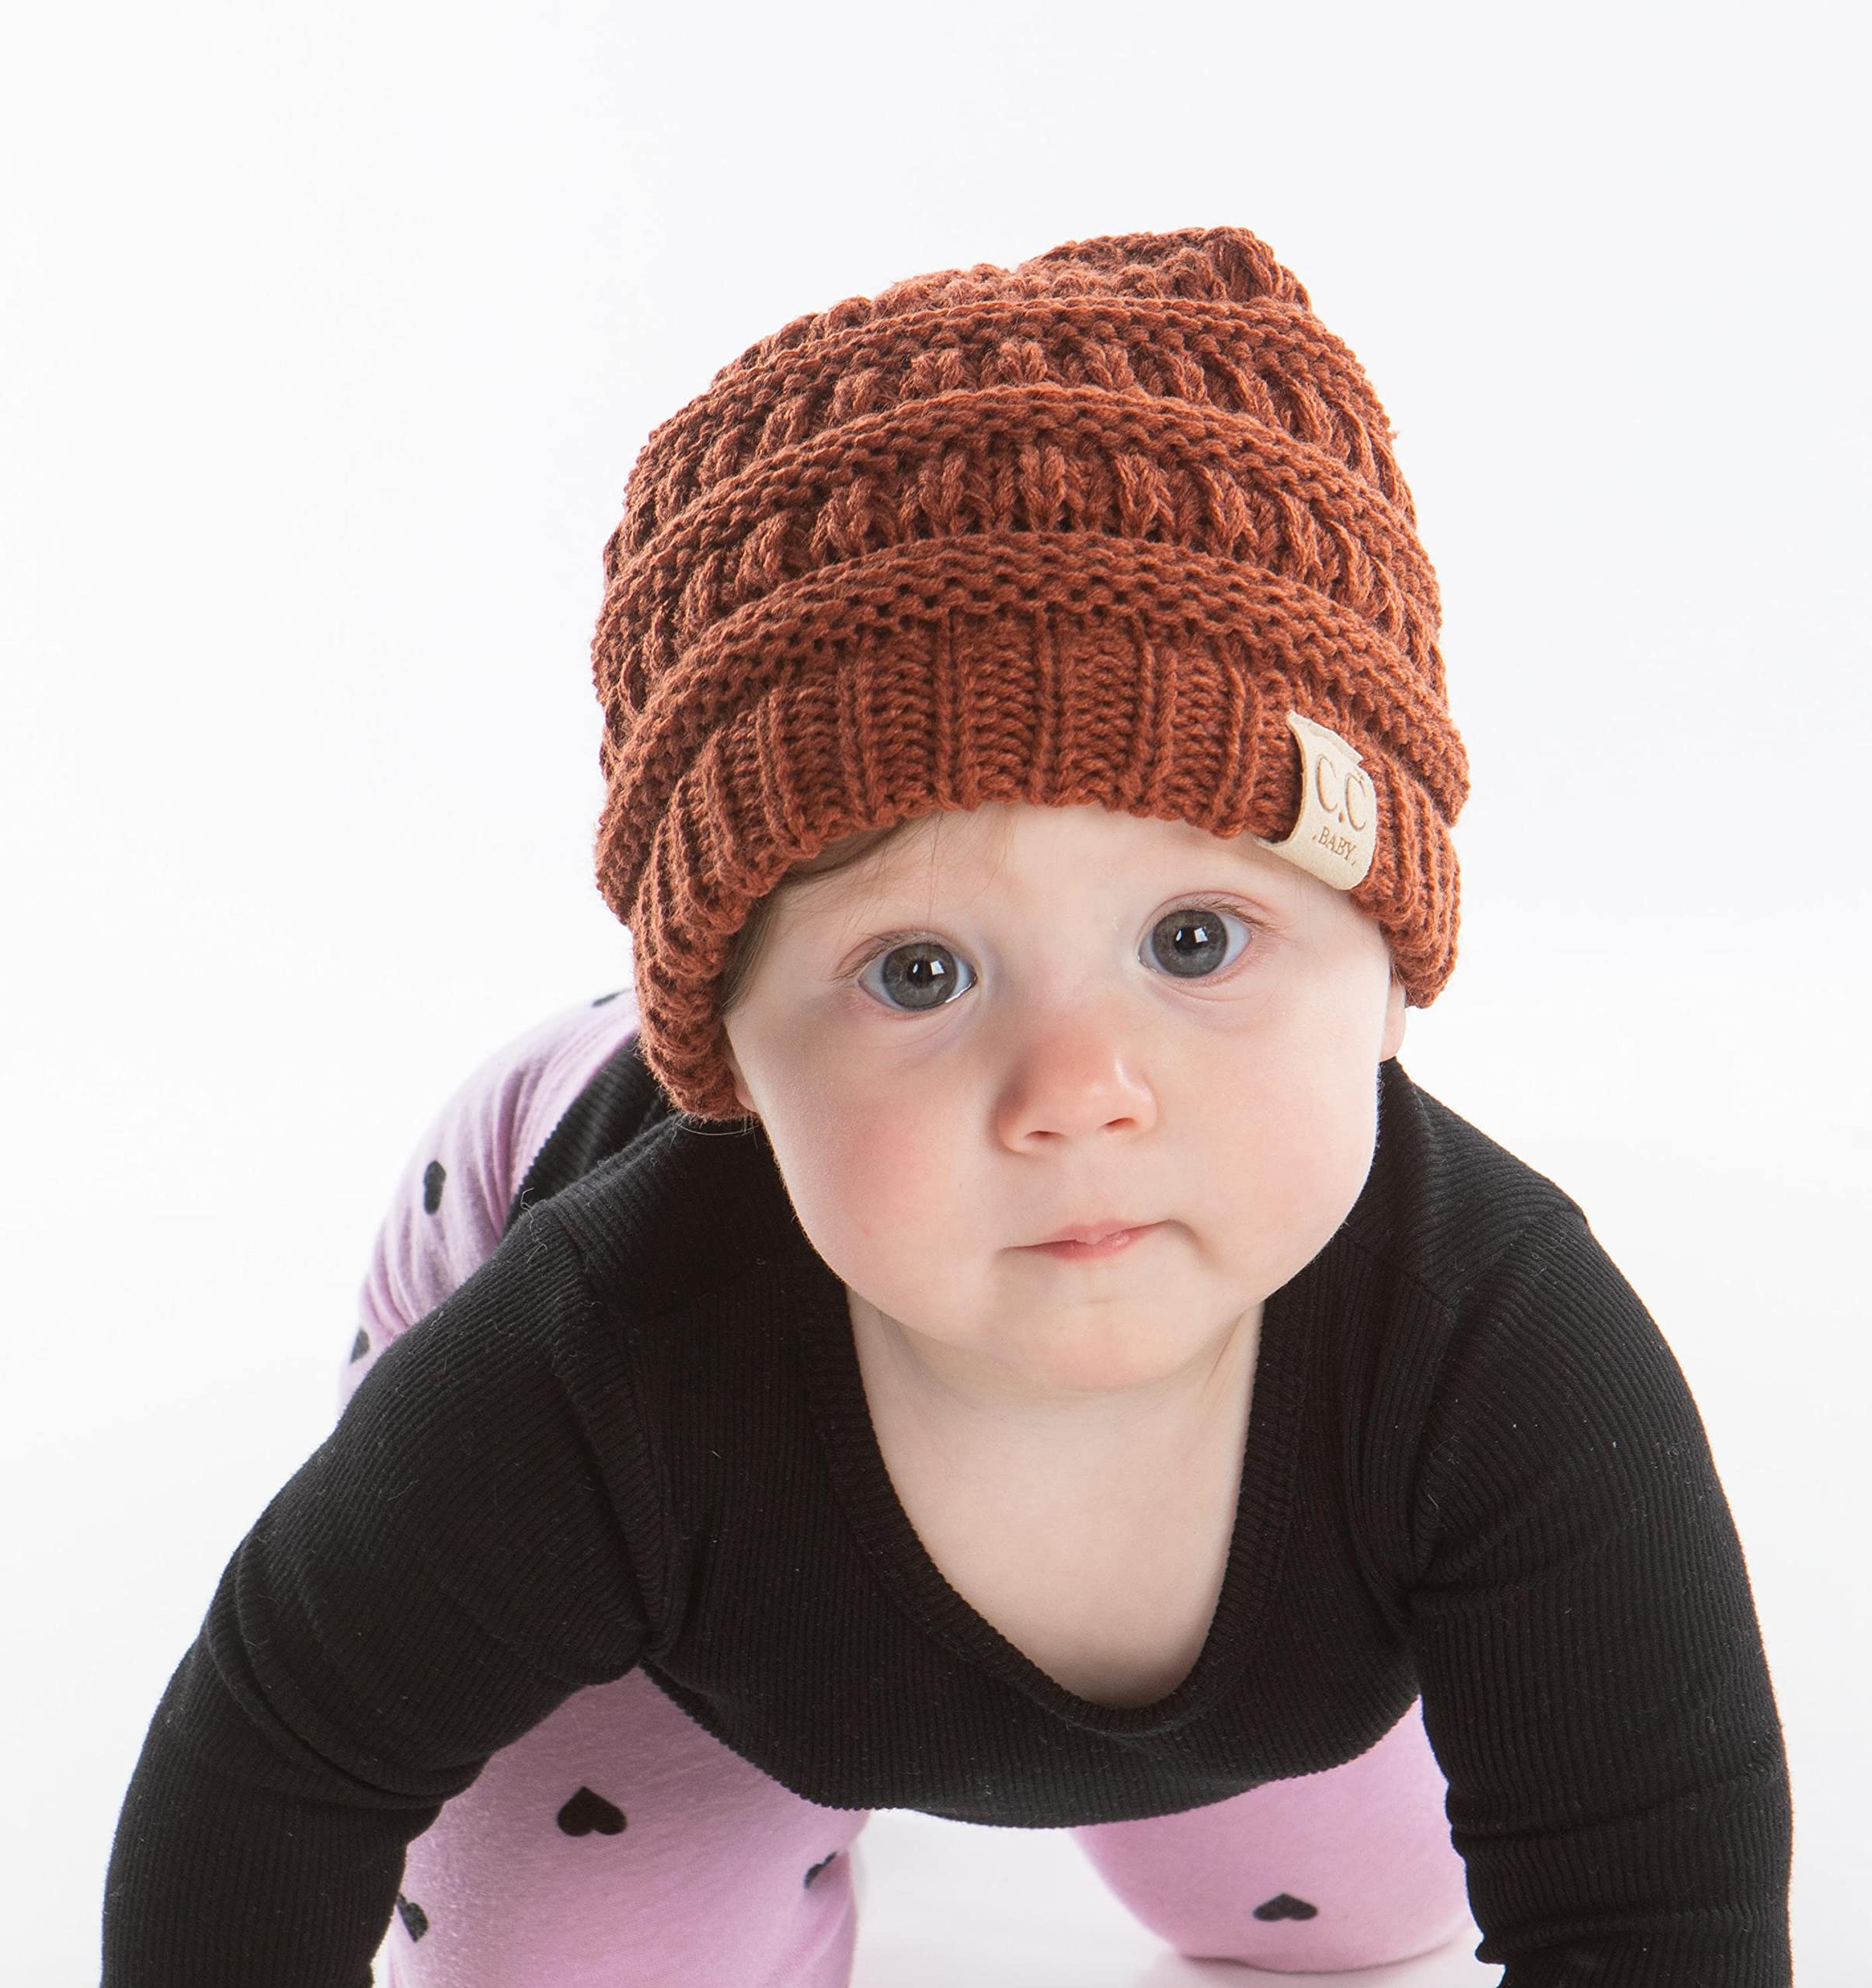 Funky Junque Beanie Infant Baby Skull Cap Hat (NO POM) - Rust